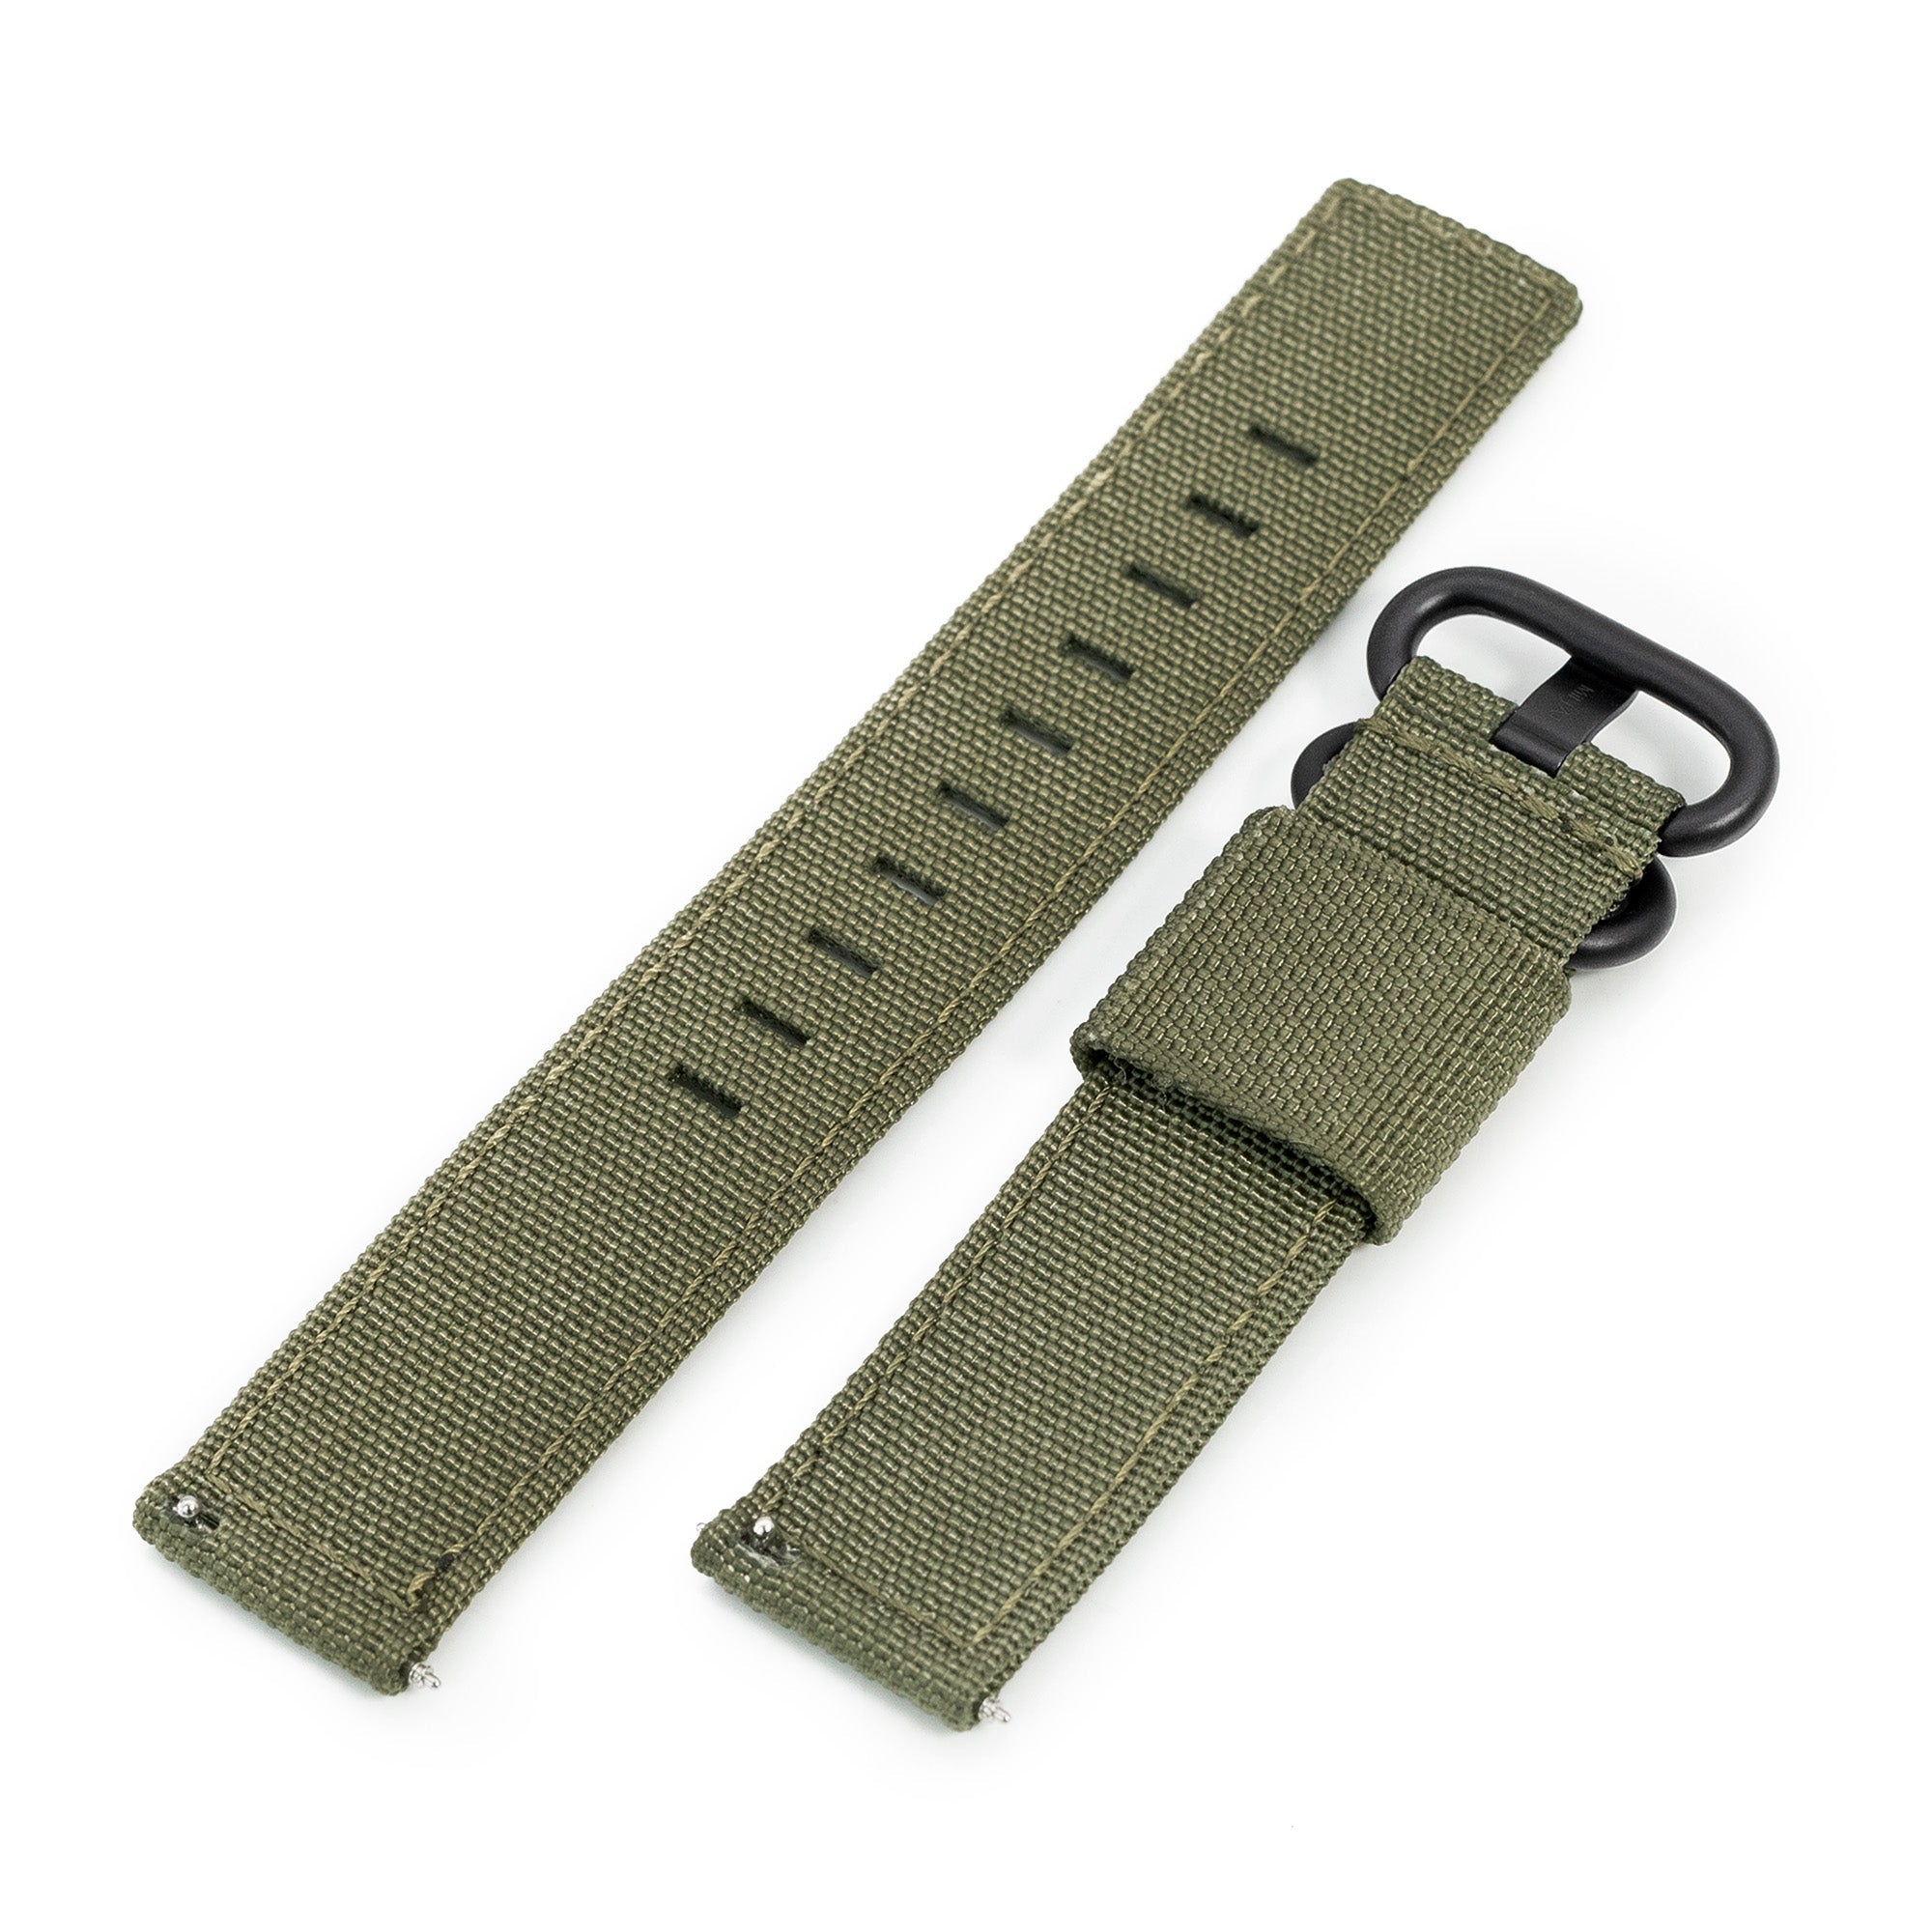 Q.R. 20mm 2-pcs Ribbed Nylon Watch Band, Military Green Strapcode Watch Bands